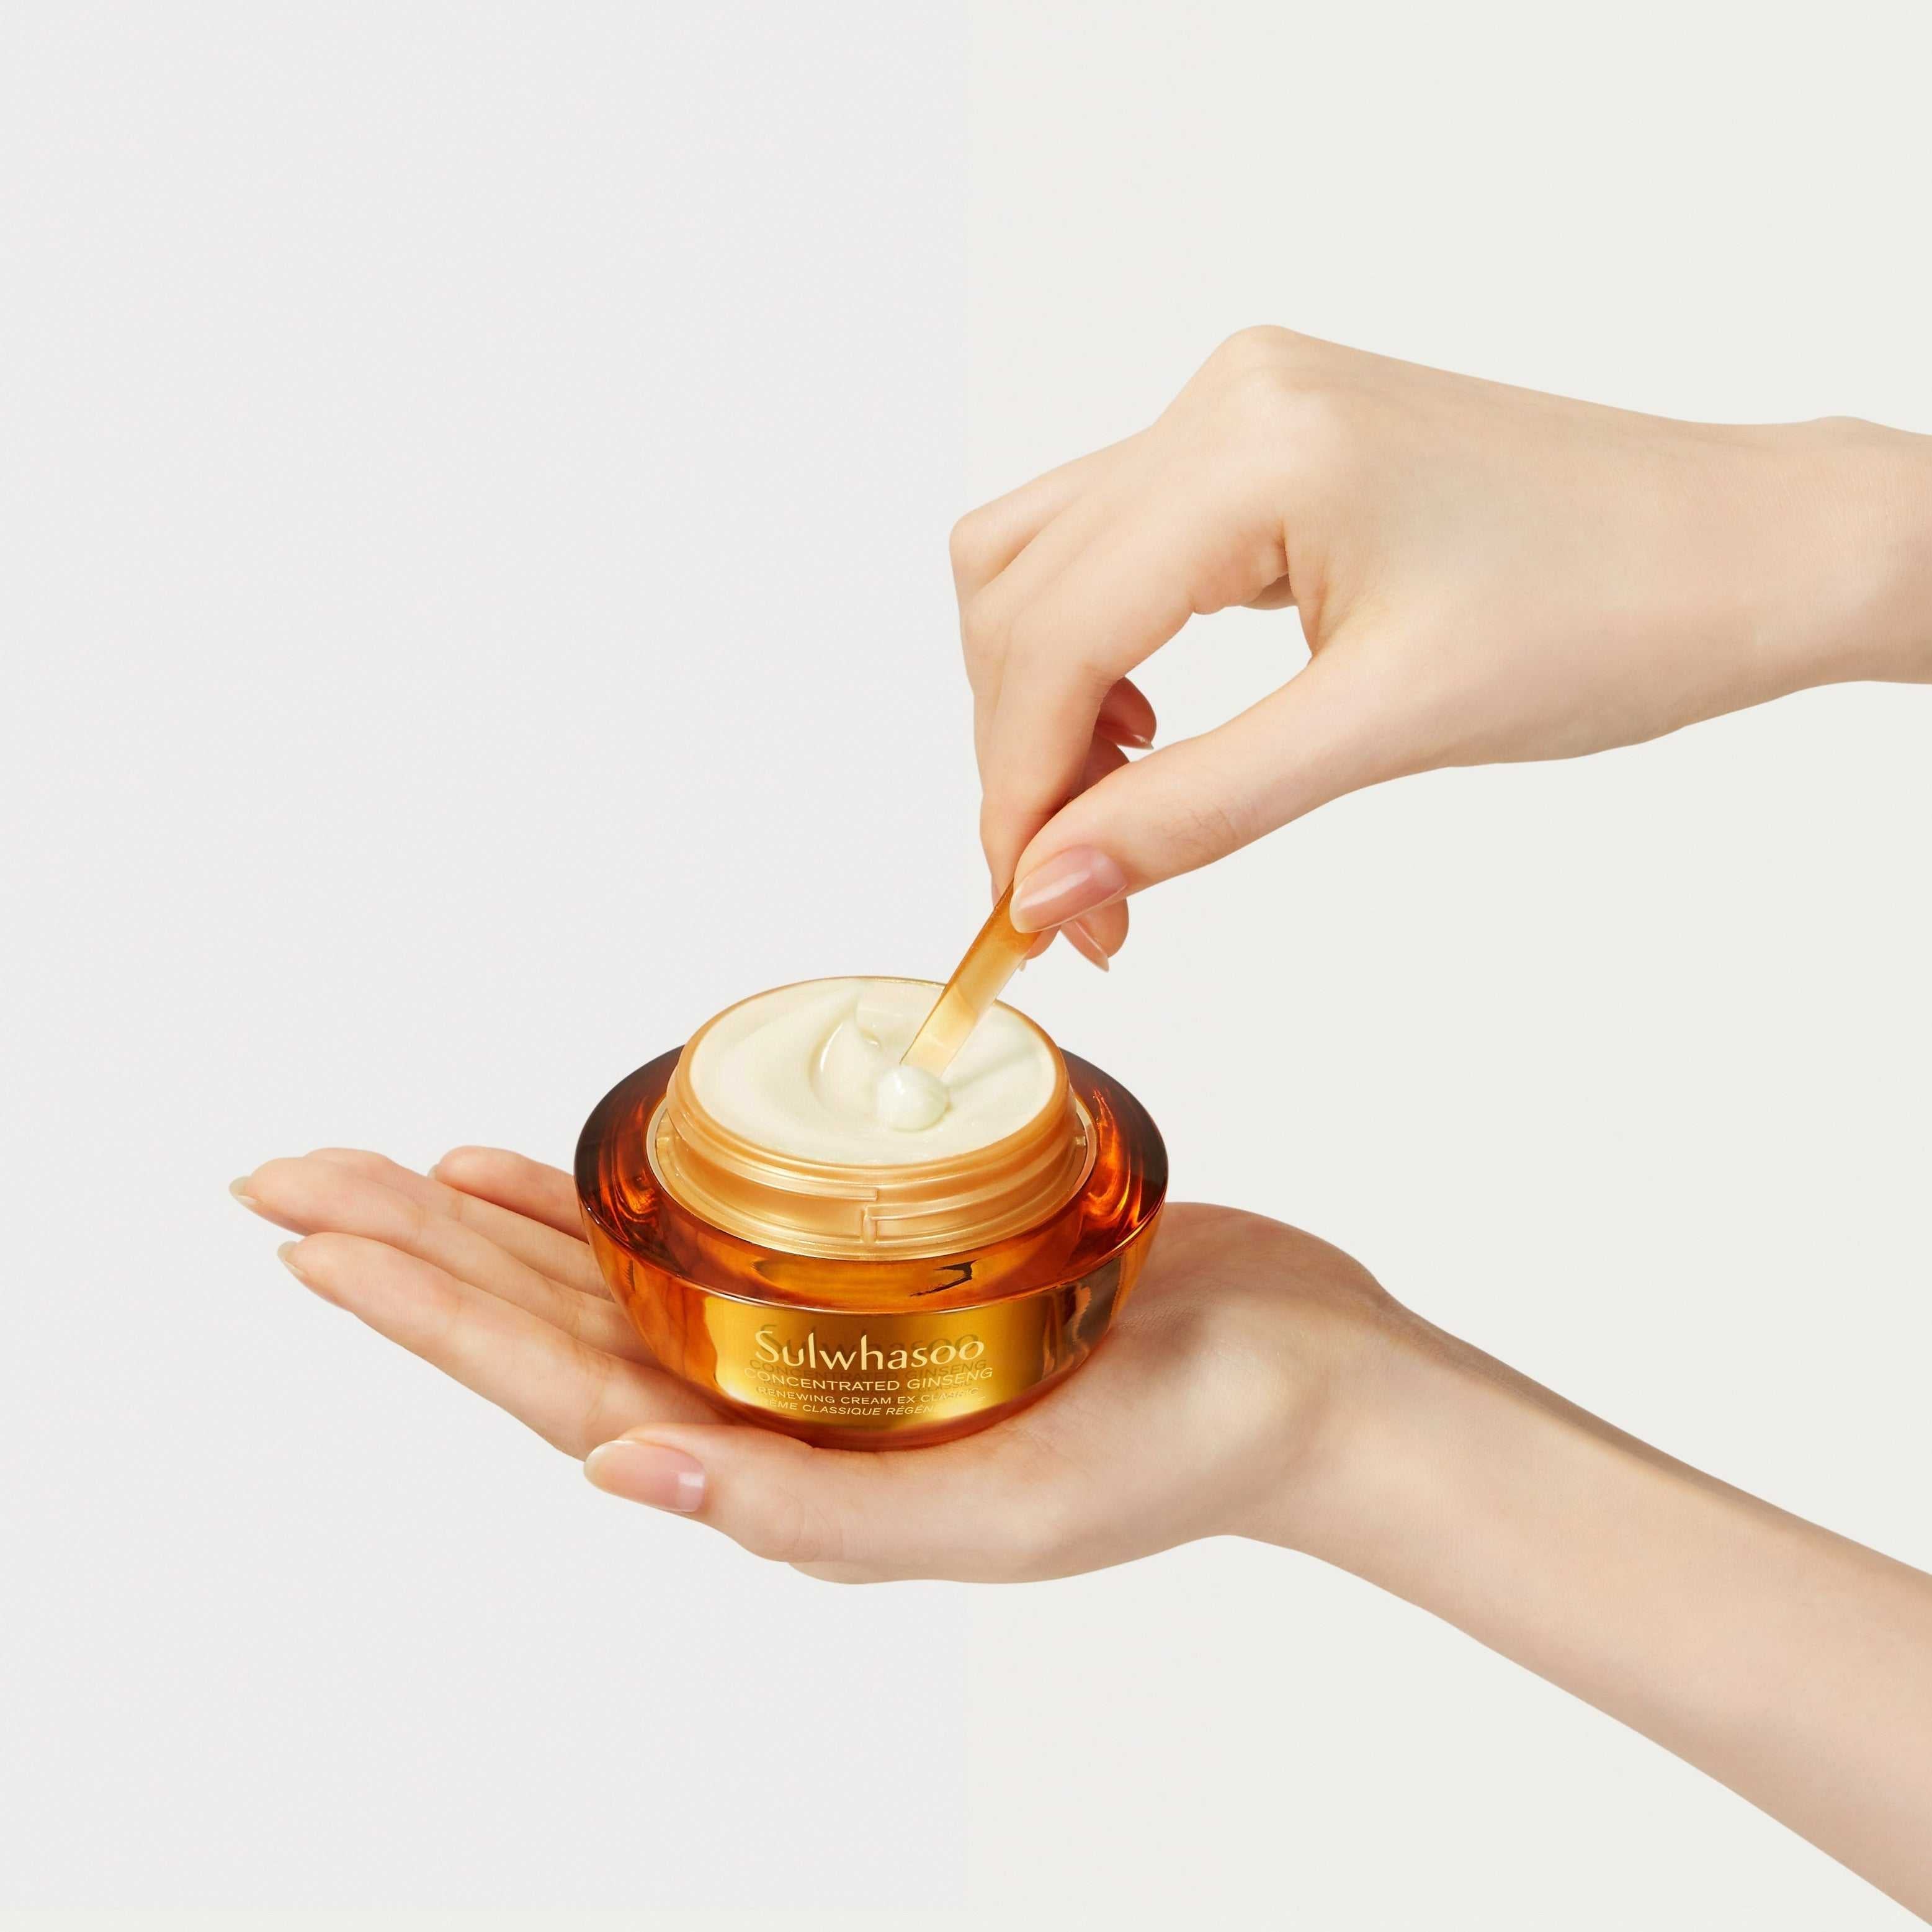 Concentrated Ginseng Renewing Cream EX Classic